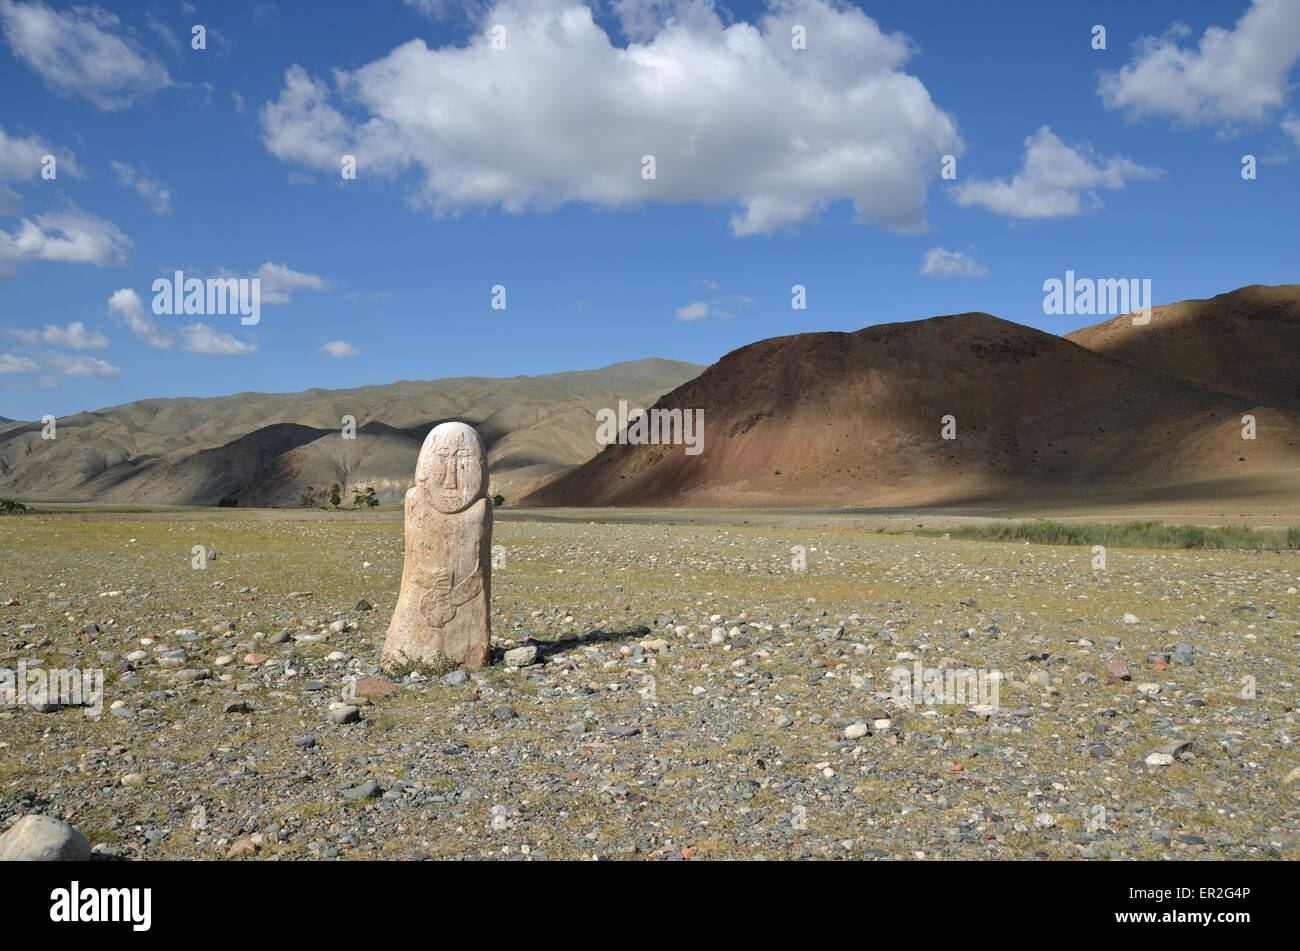 Balbal and funeral mounds in western Mongolia, west of Olgii city, Bayan Olgii province. Balbals are antic standing stones. Stock Photo